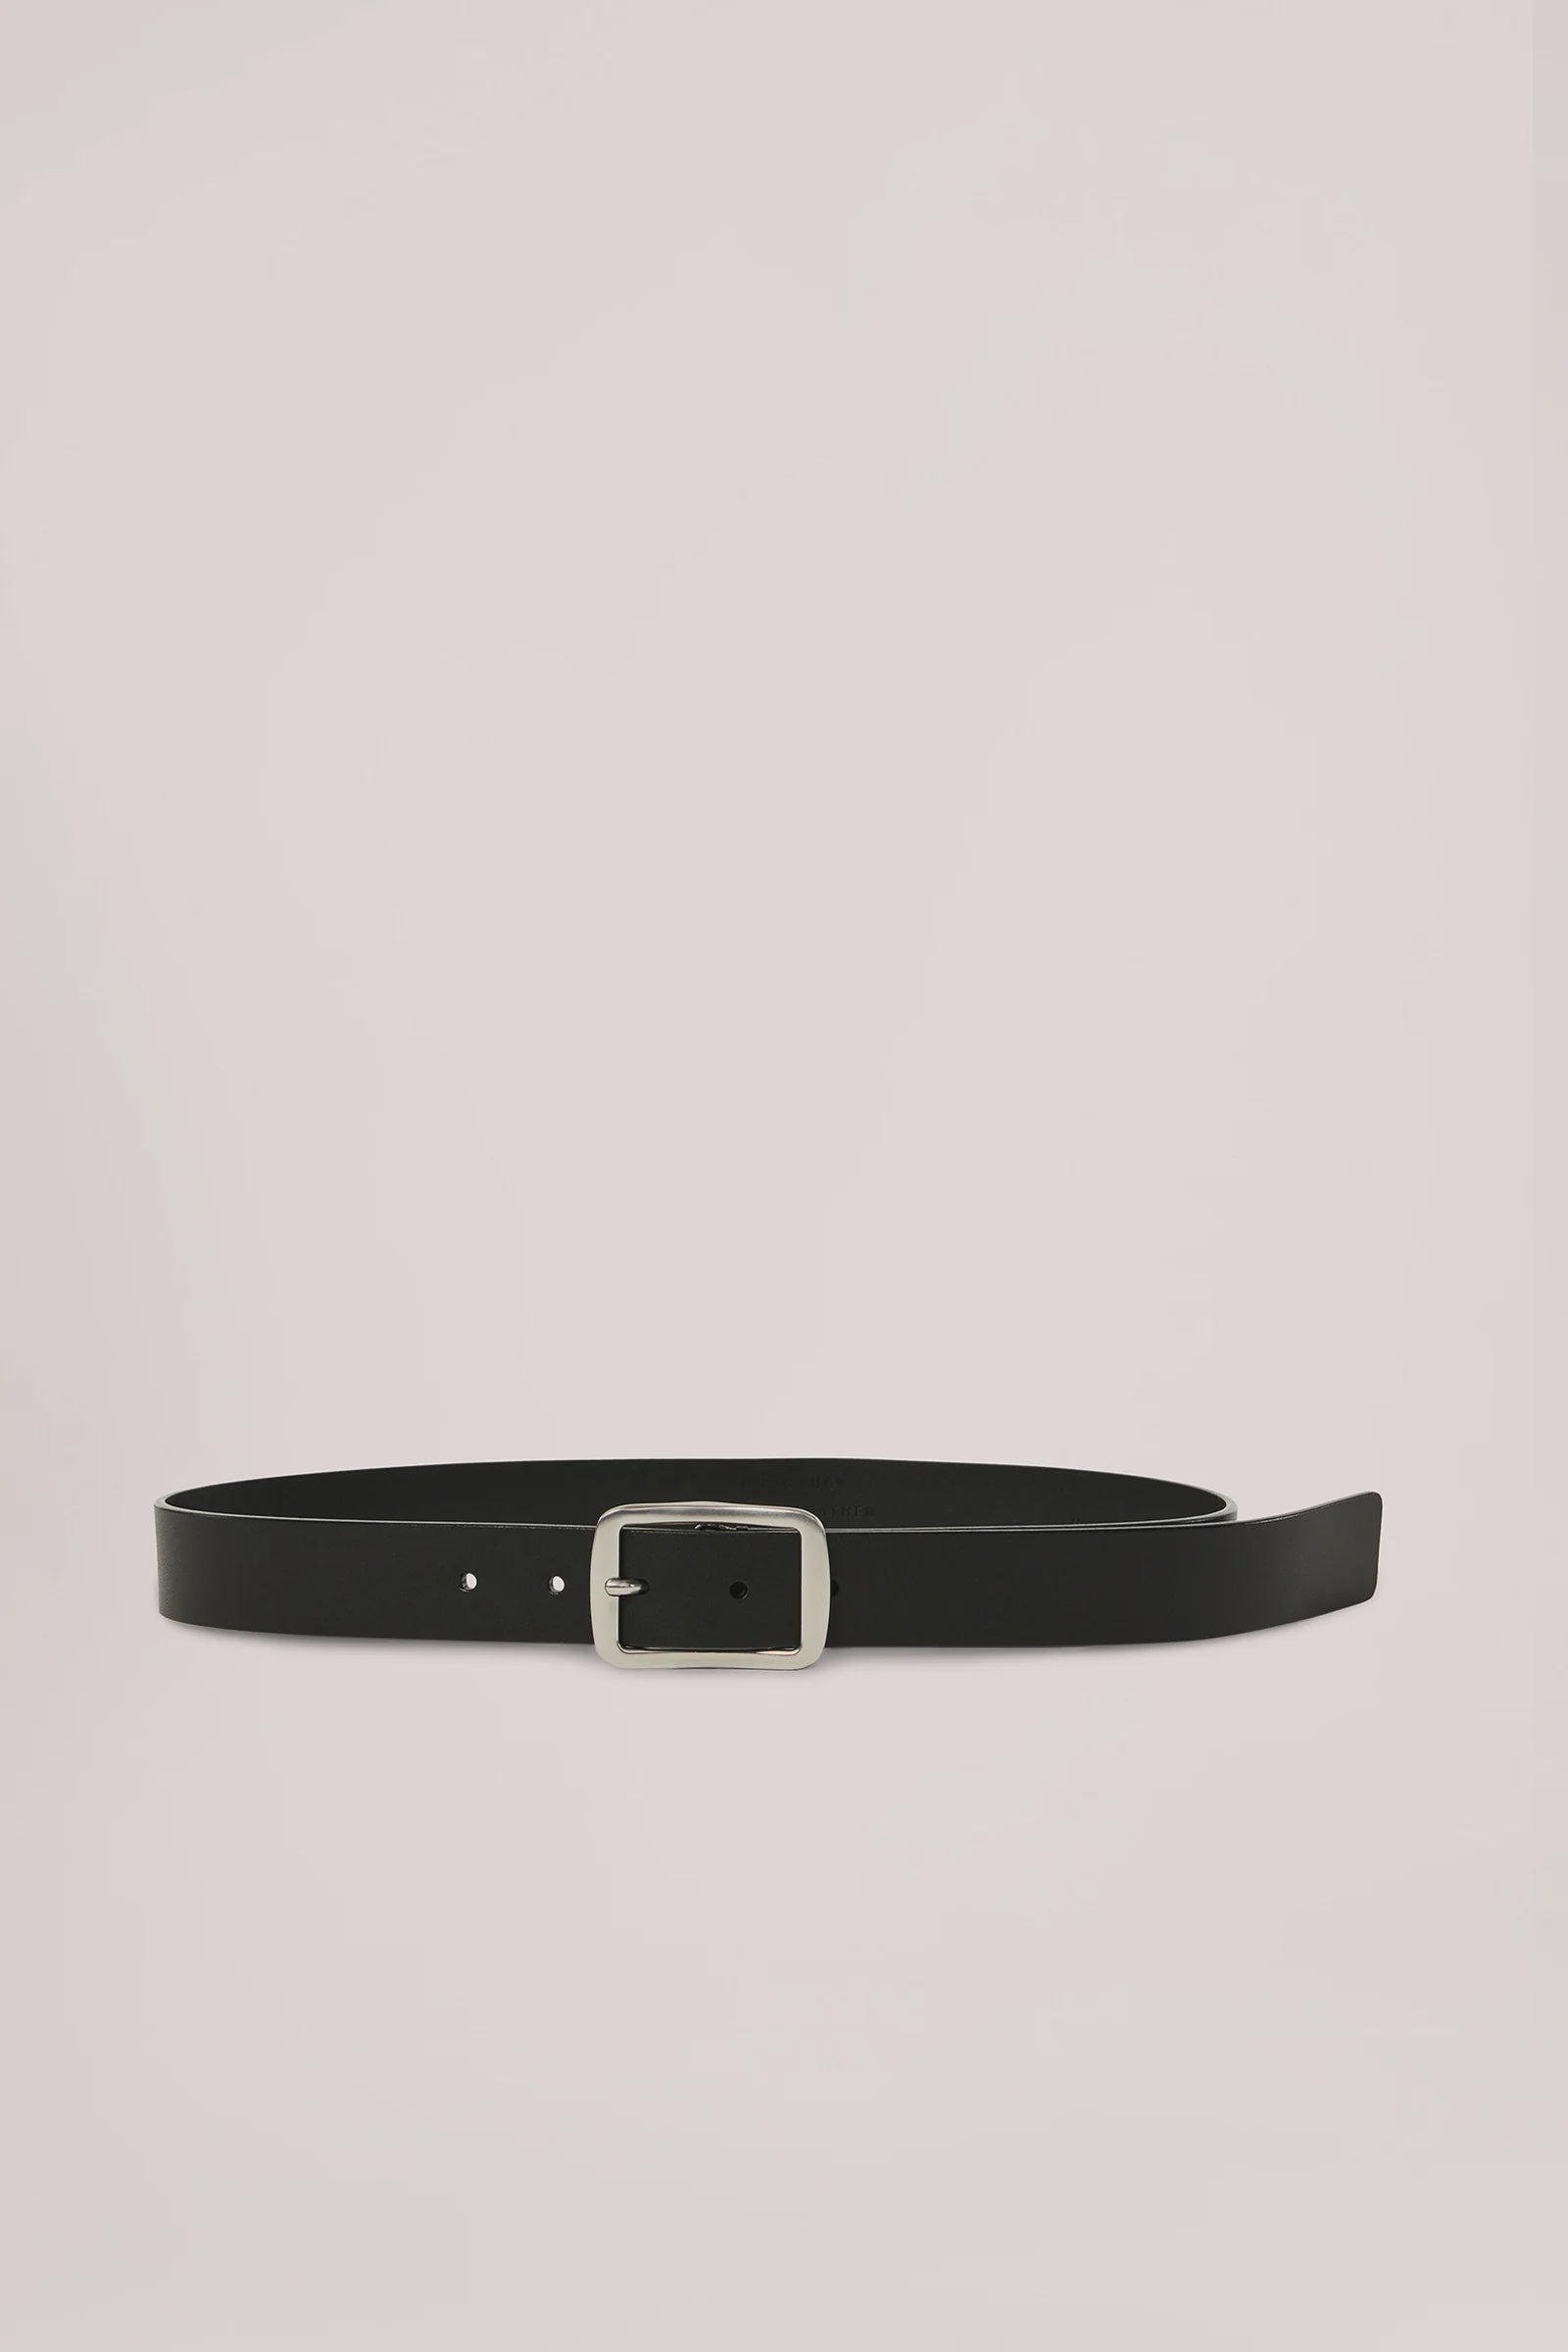 Nude Lucy | Classic Leather Belt - Black